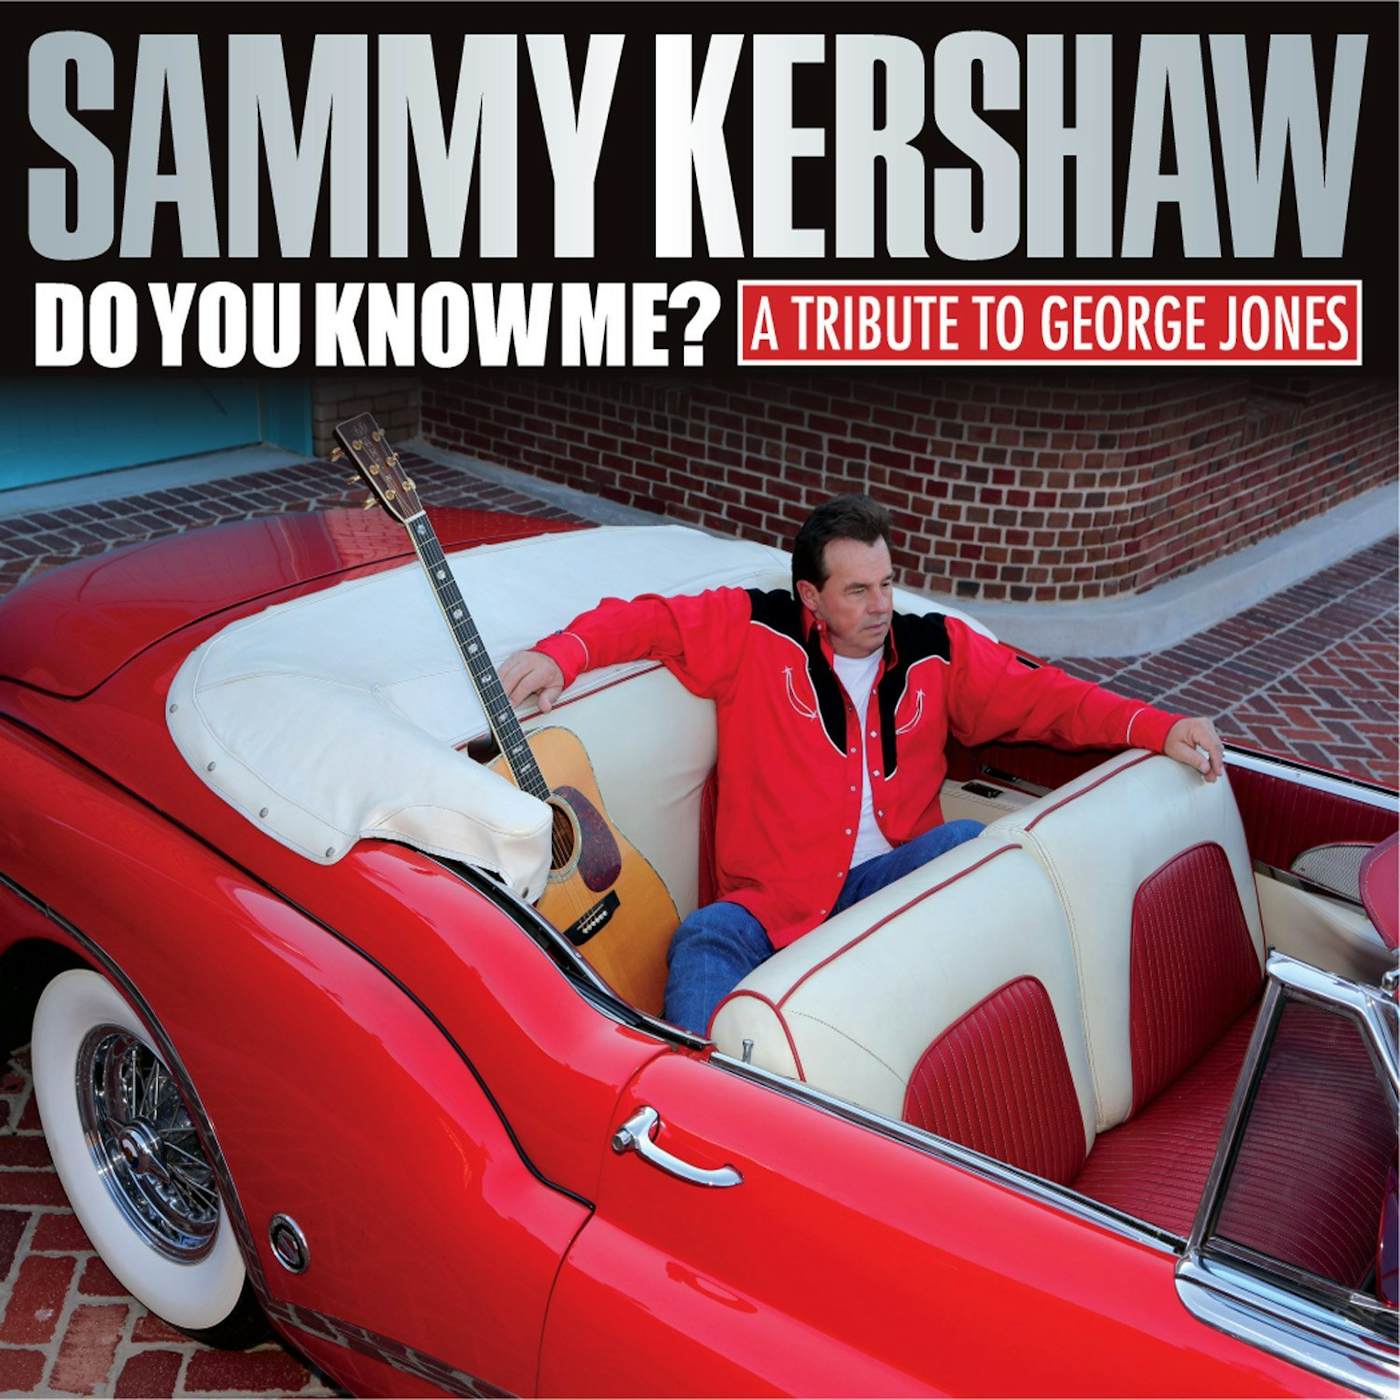 Sammy Kershaw DO YOU KNOW ME: A TRIBUTE TO GEORGE JONES Vinyl Record